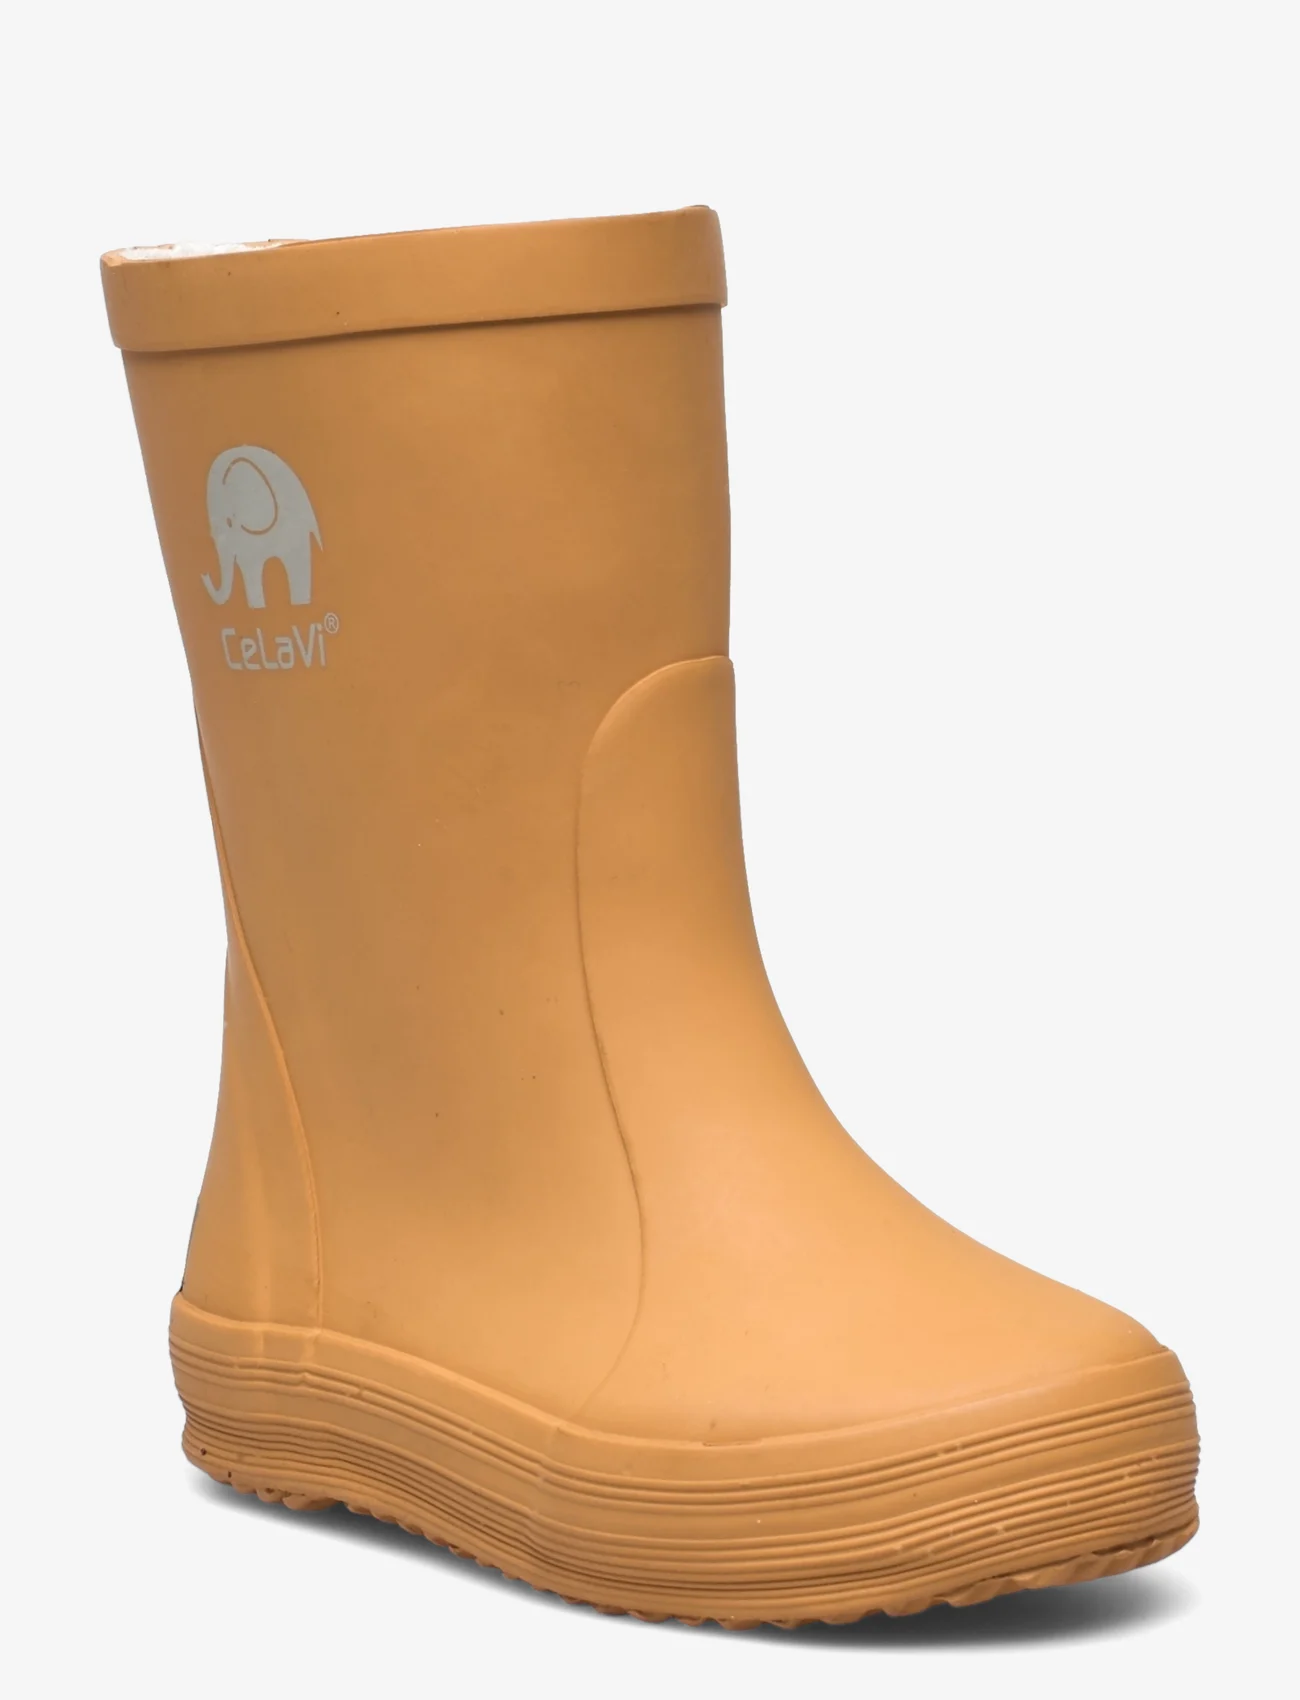 CeLaVi - Basic wellies -solid - unlined rubberboots - buckthorn brown - 0